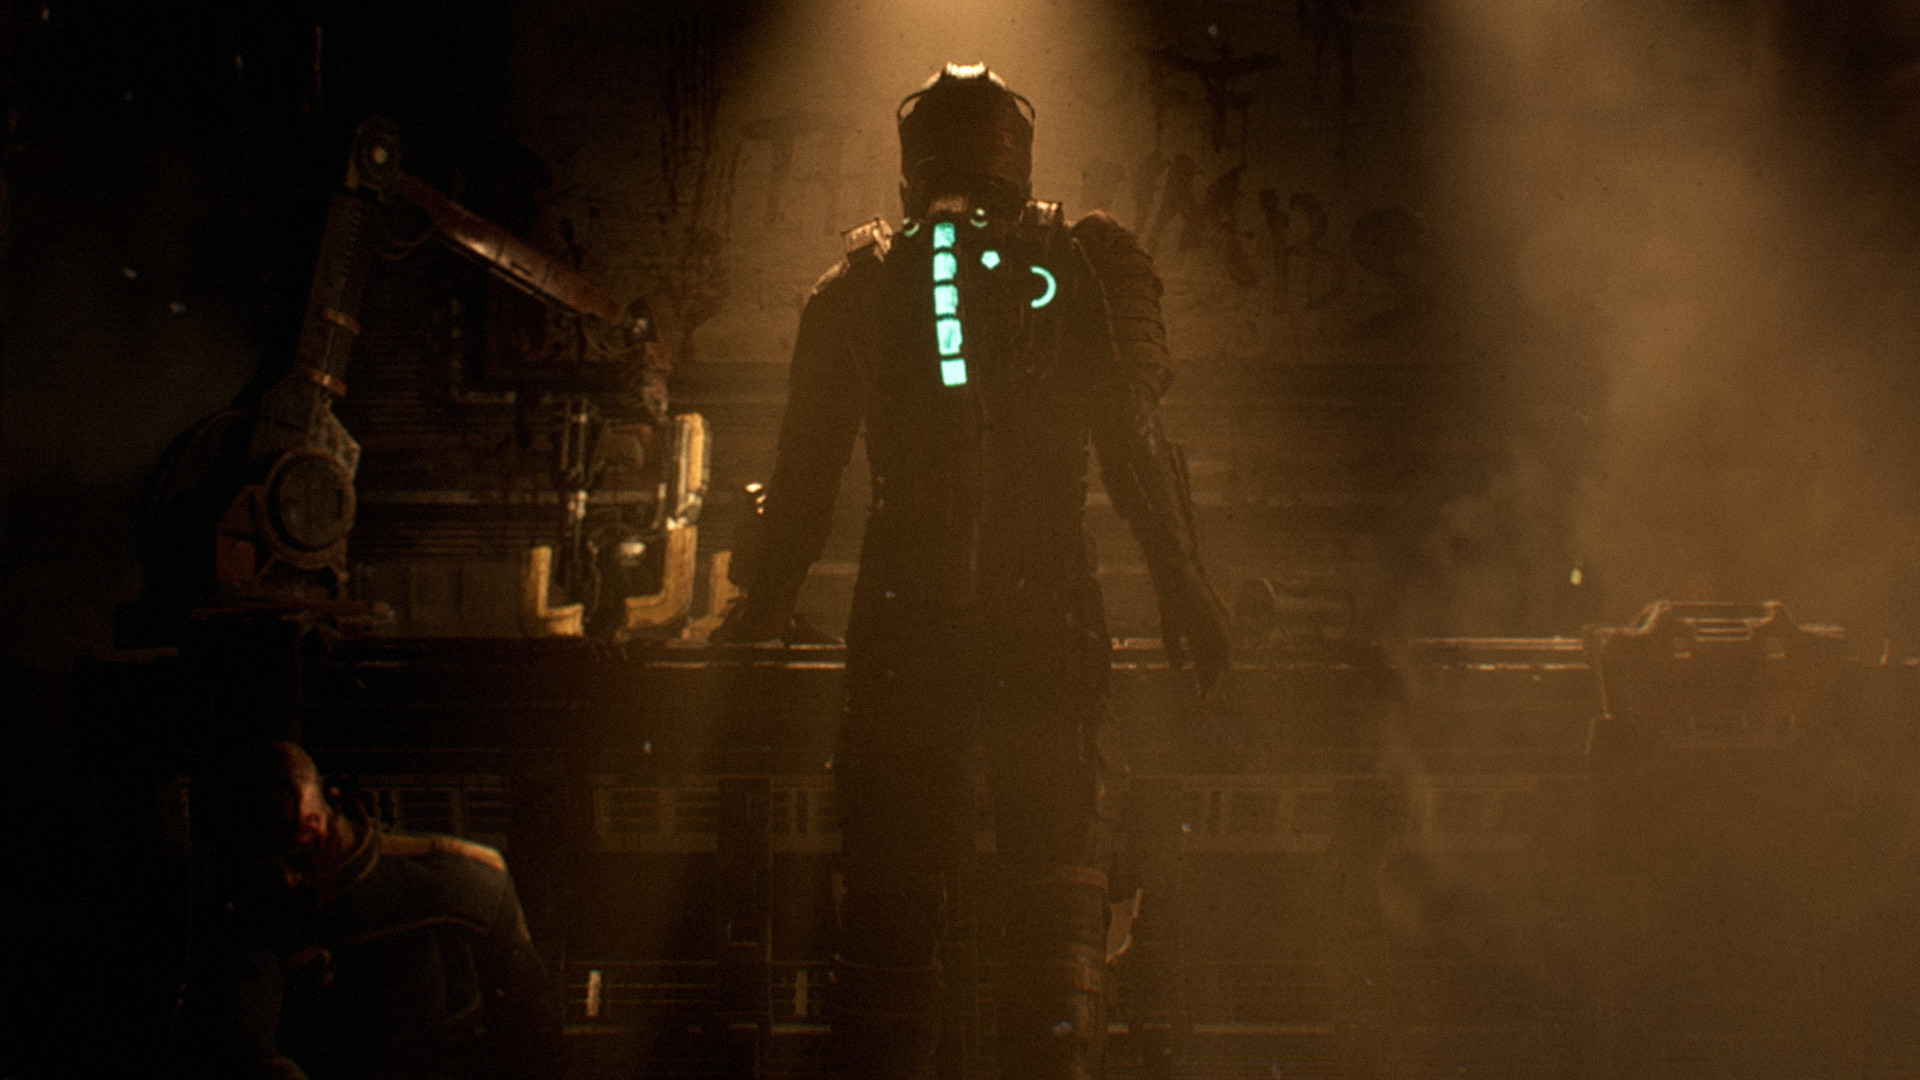 Dead Space is back, exclusively on PC and next-gen consoles